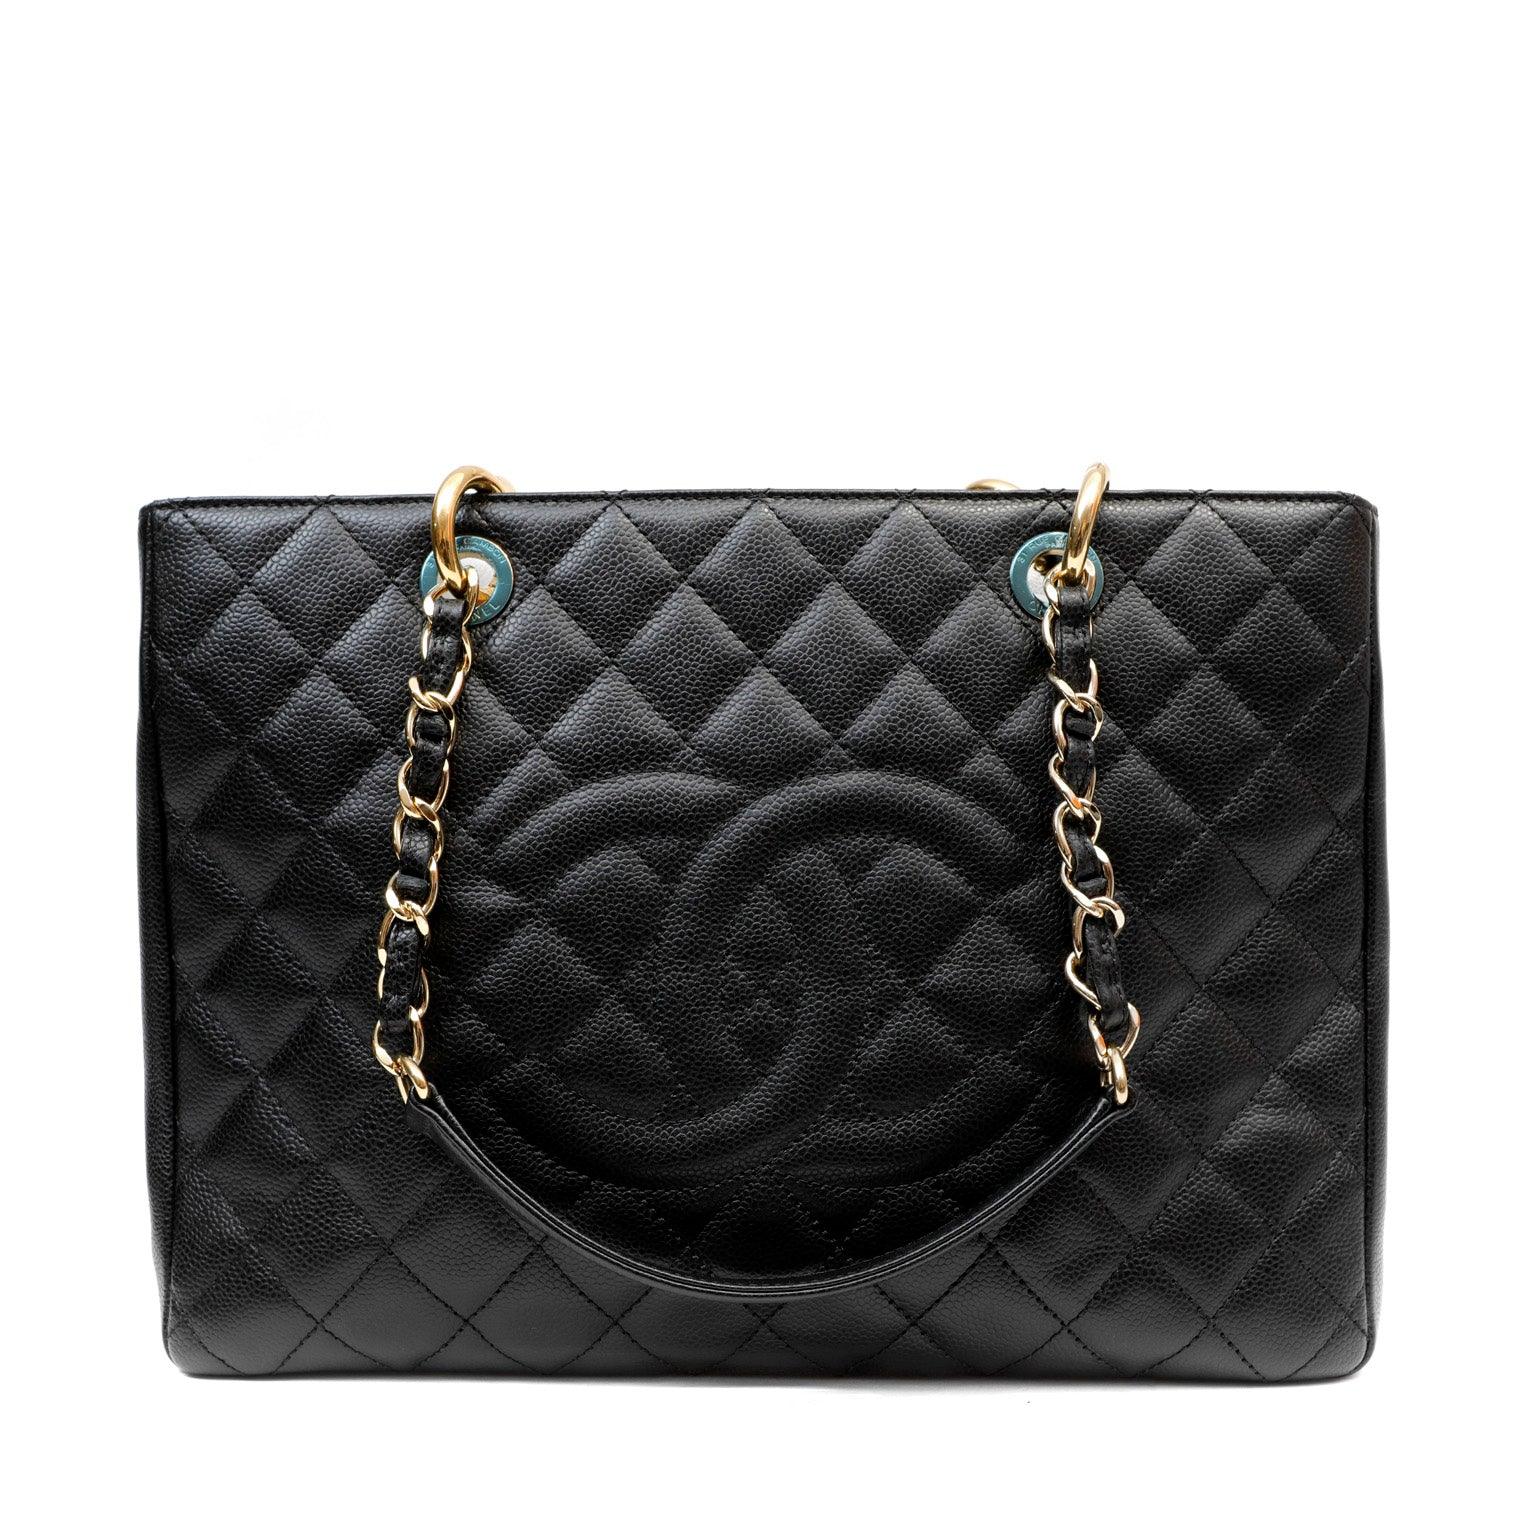 Chanel Caviar Leather GST Grand Shopping Tote Bag